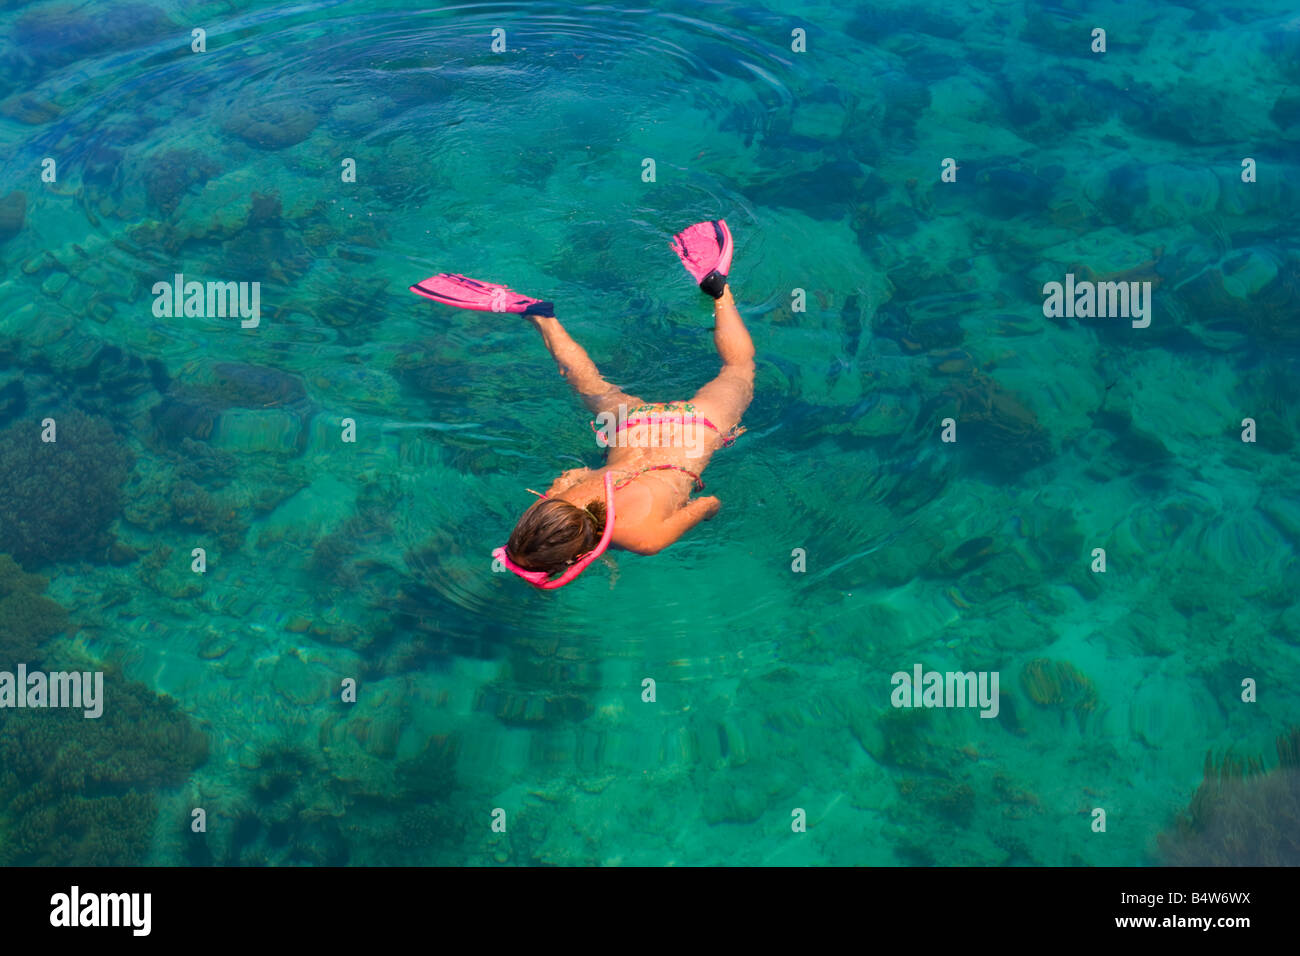 Snorkelling across corals in shallow water Mabul Island Sabah Malaysia Stock Photo